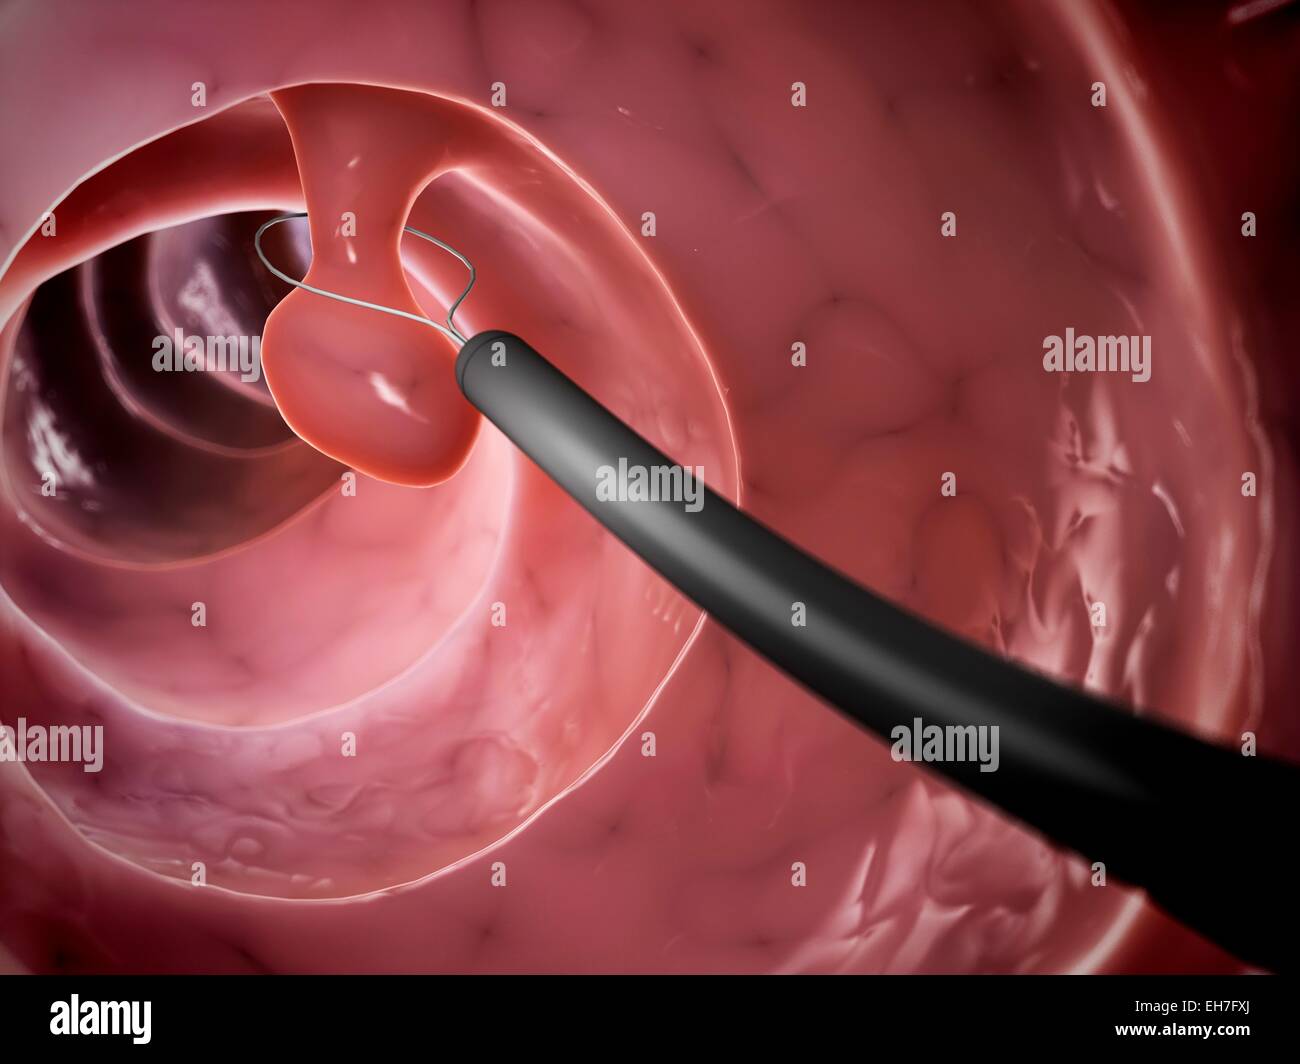 Removal of polyp, artwork Stock Photo